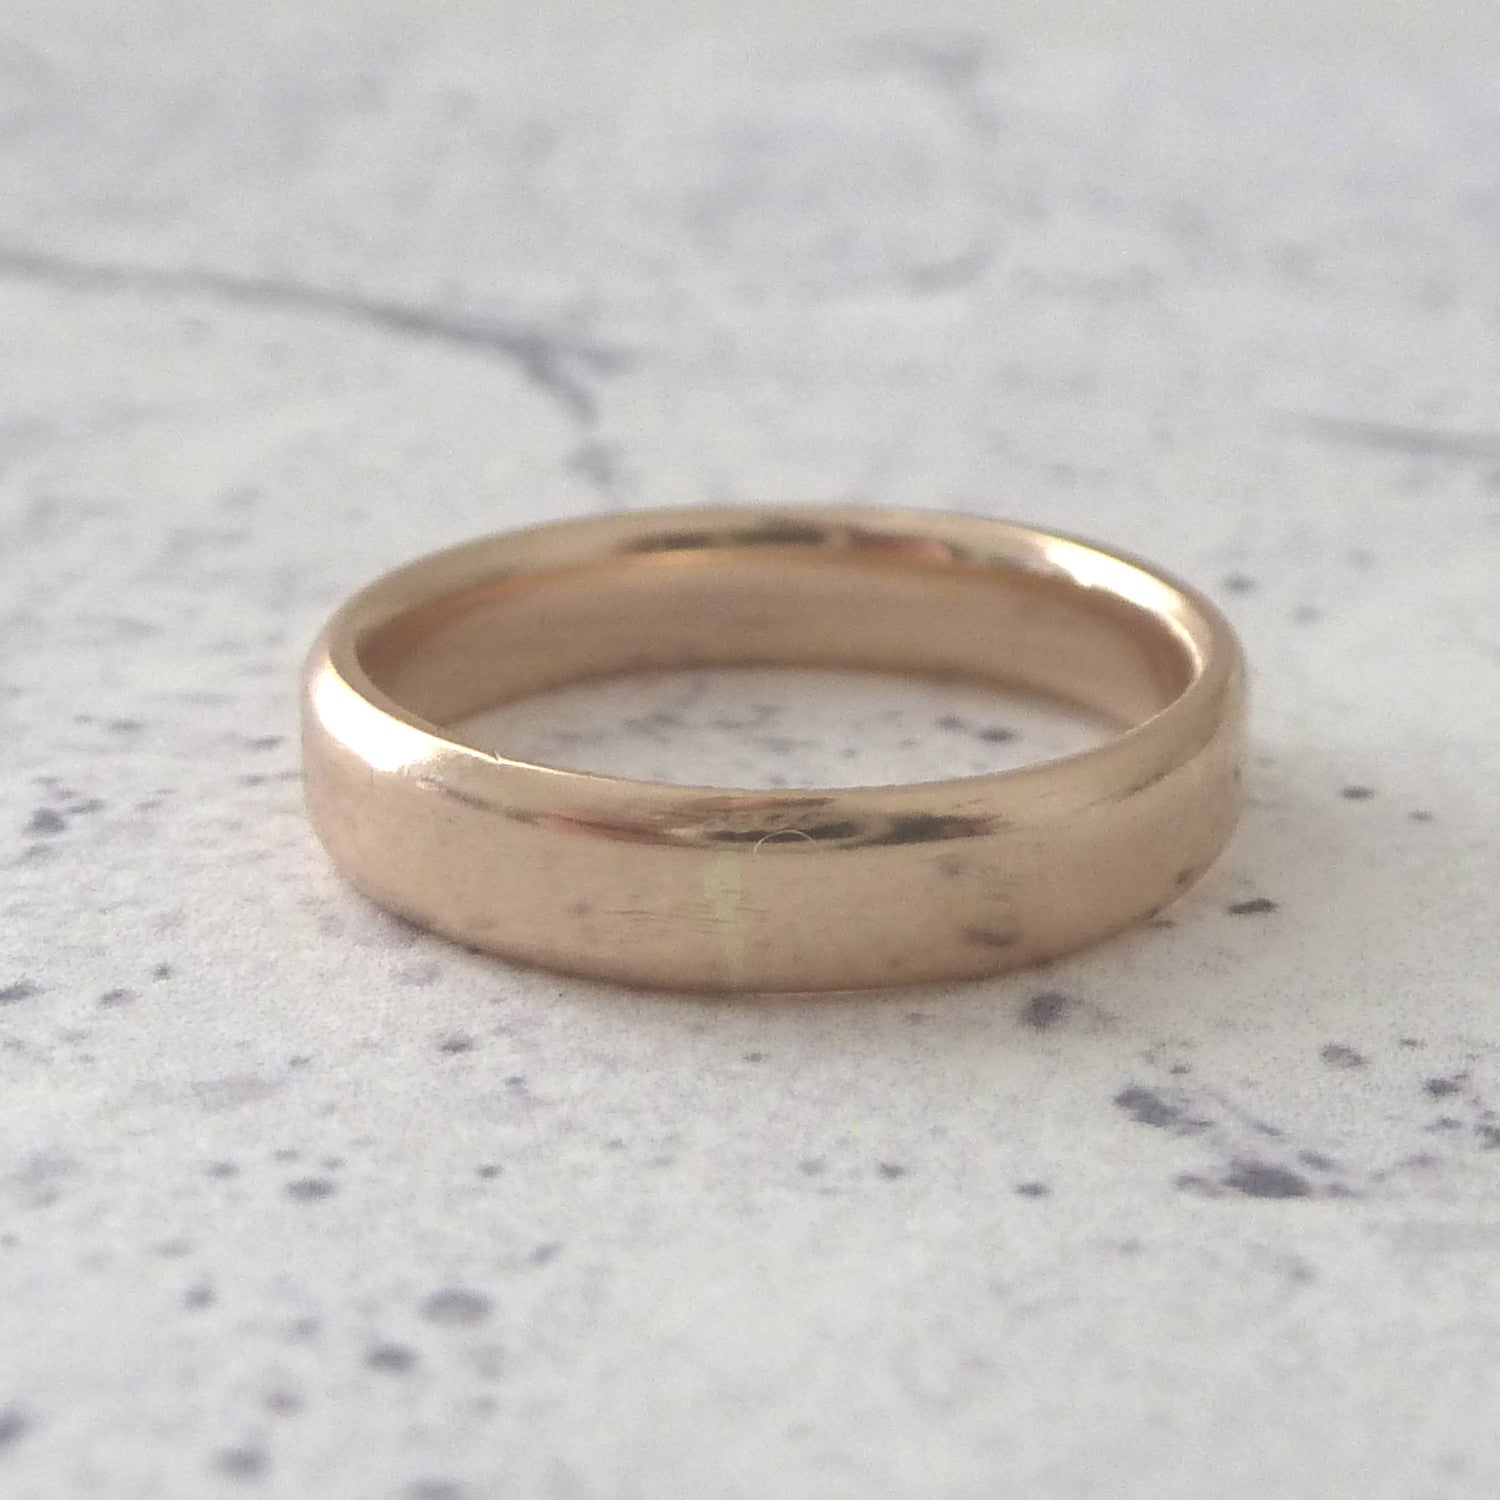 4mm 9ct rose gold wedding ring made in recycled gold, smooth finish